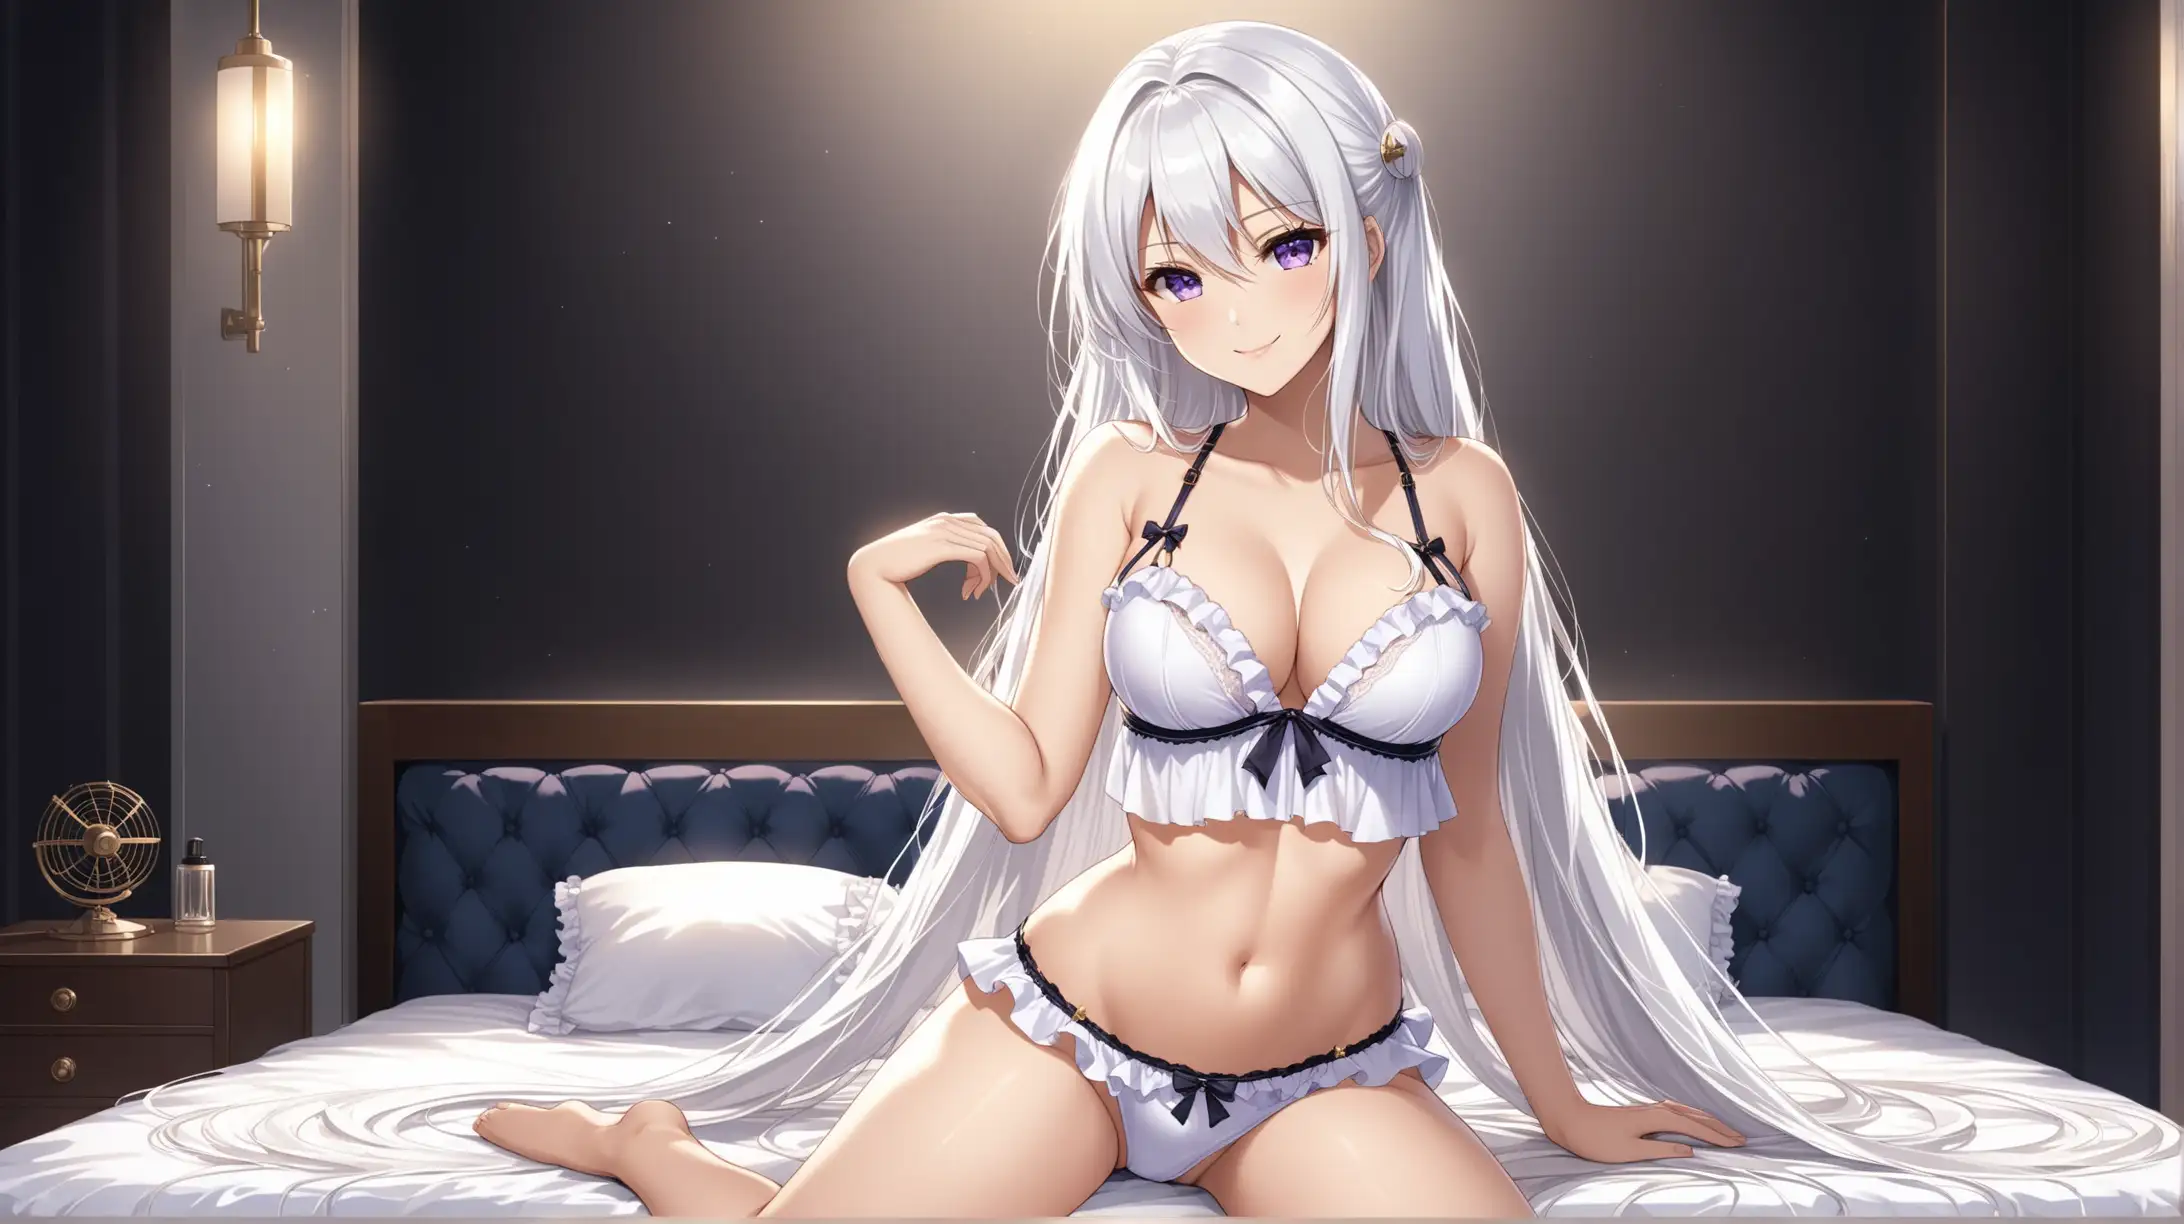 Seductive Pose of Enterprise from Azur Lane in Frilly Lingerie